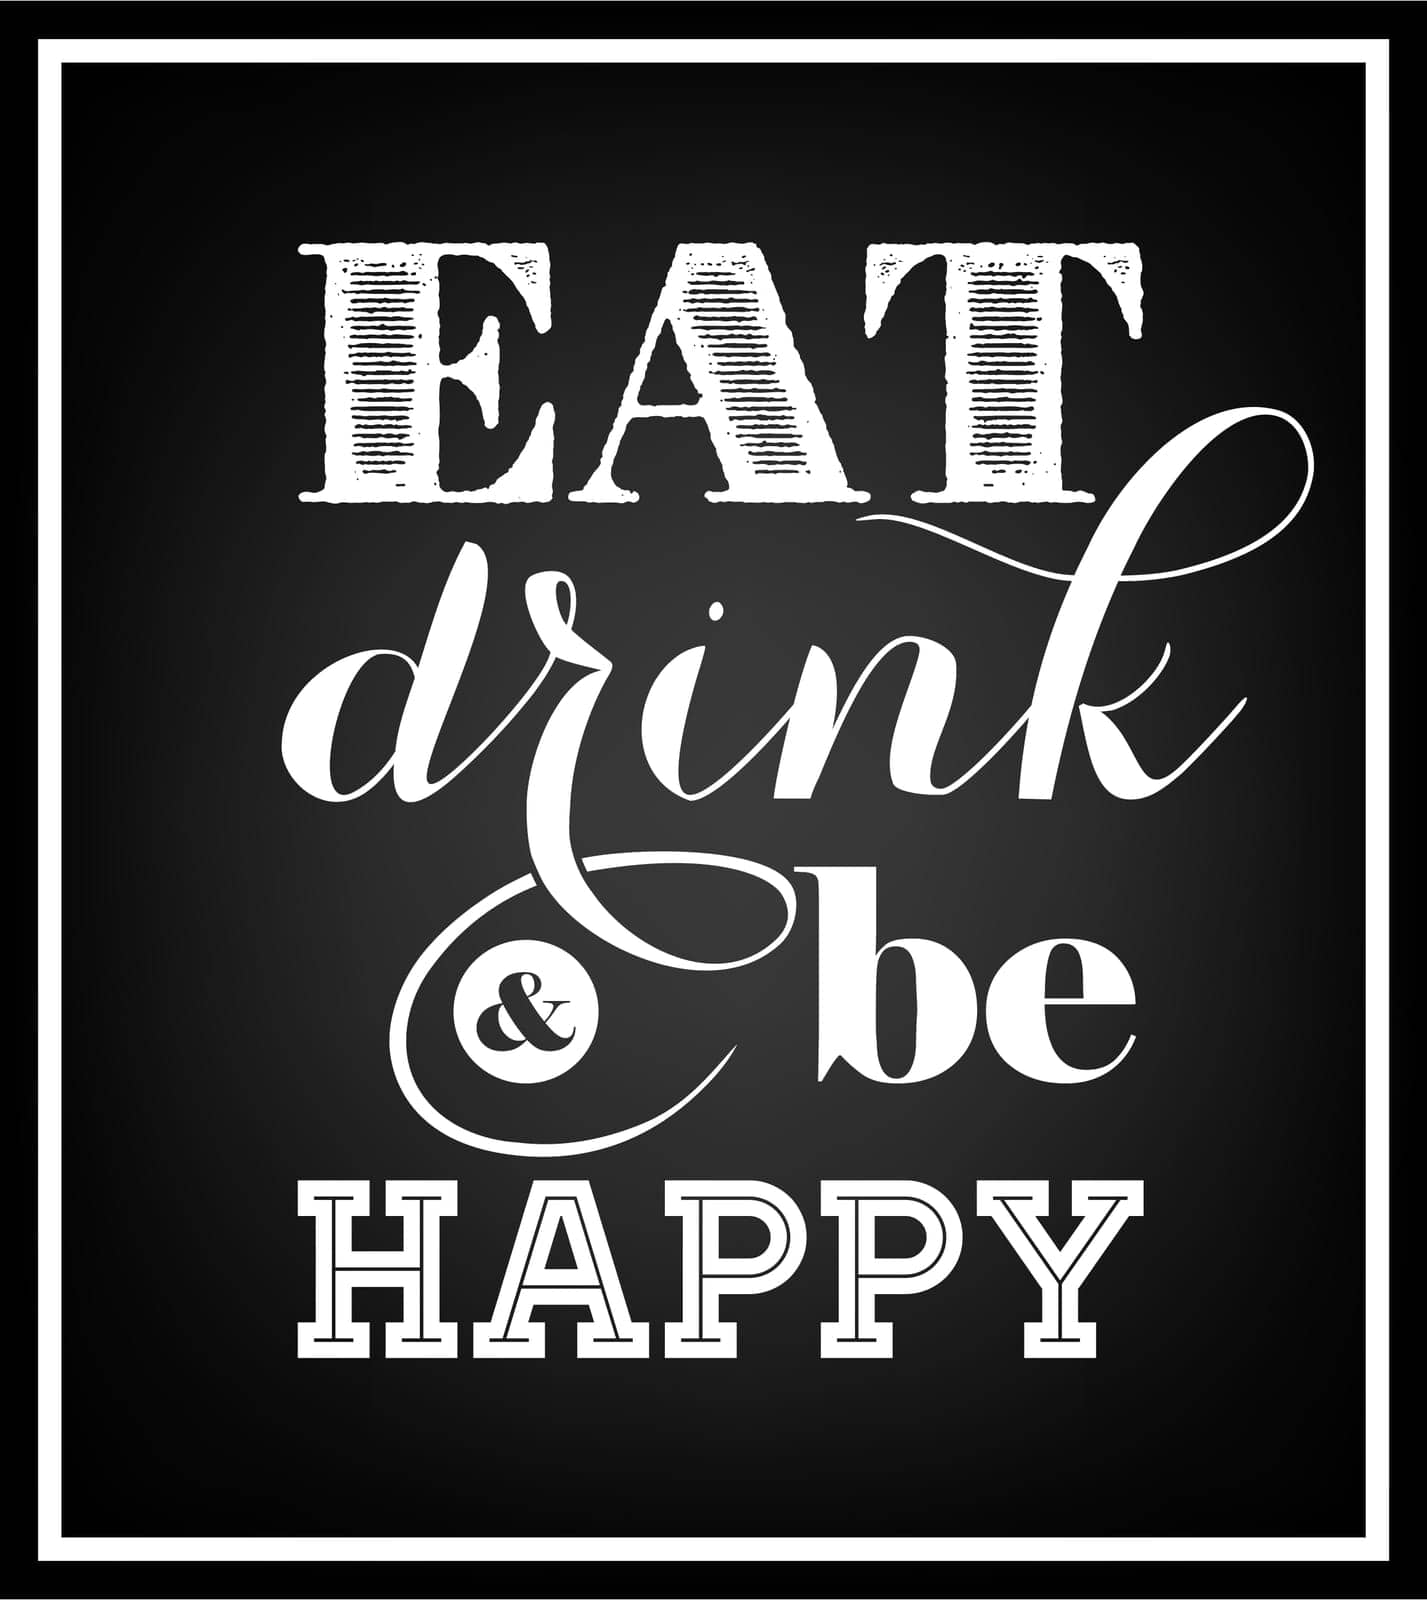 Eat, drink and be happy - Quote Typographical Background. Vector EPS8 illustration.